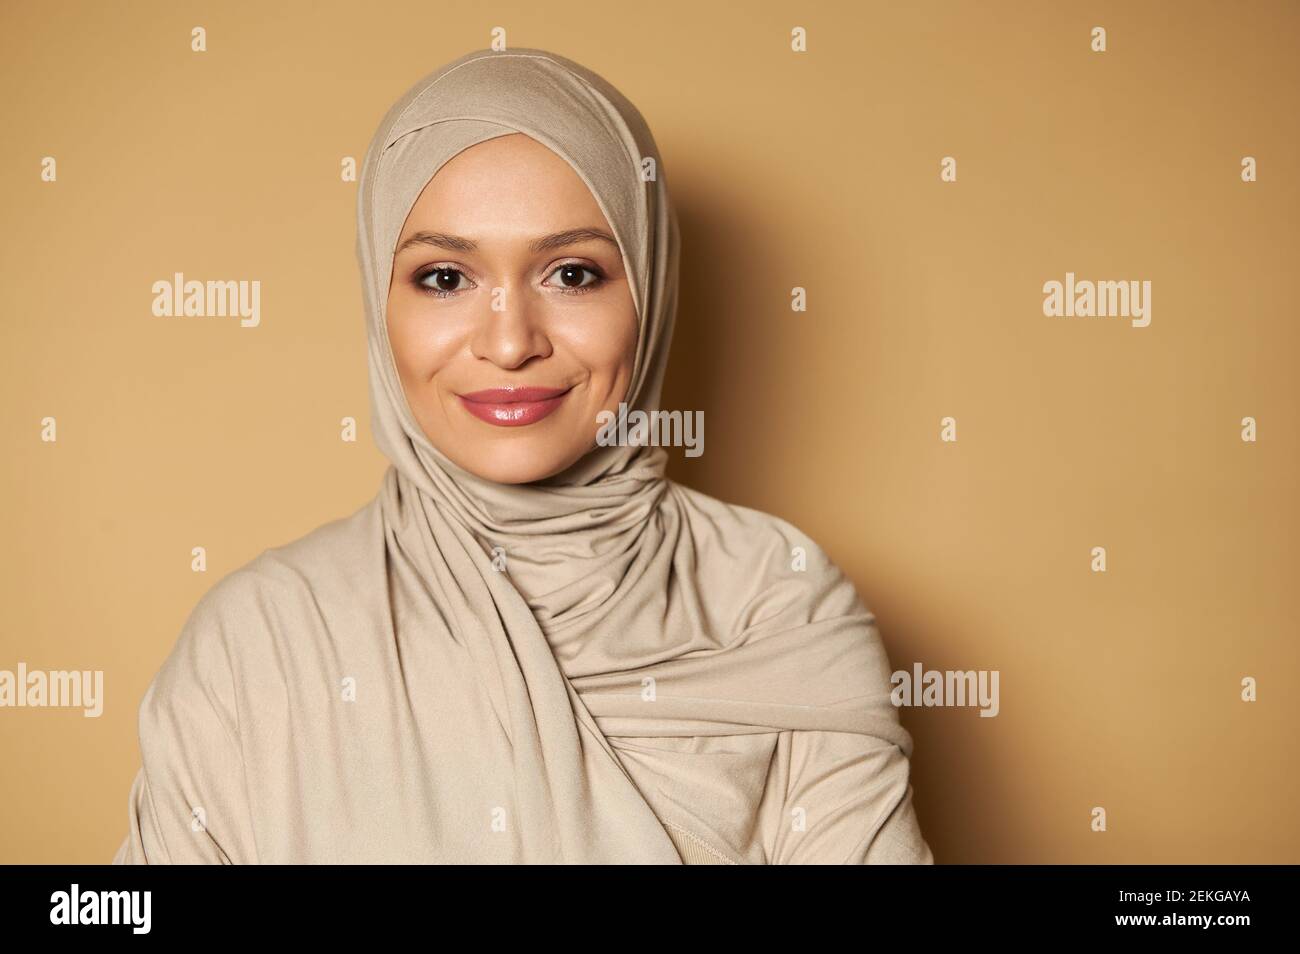 Portrait of beautiful arab muslim woman wearing hijab. Strict formal outfit and elegant appearance. Islamic fashion. Beige background with copy space. Stock Photo